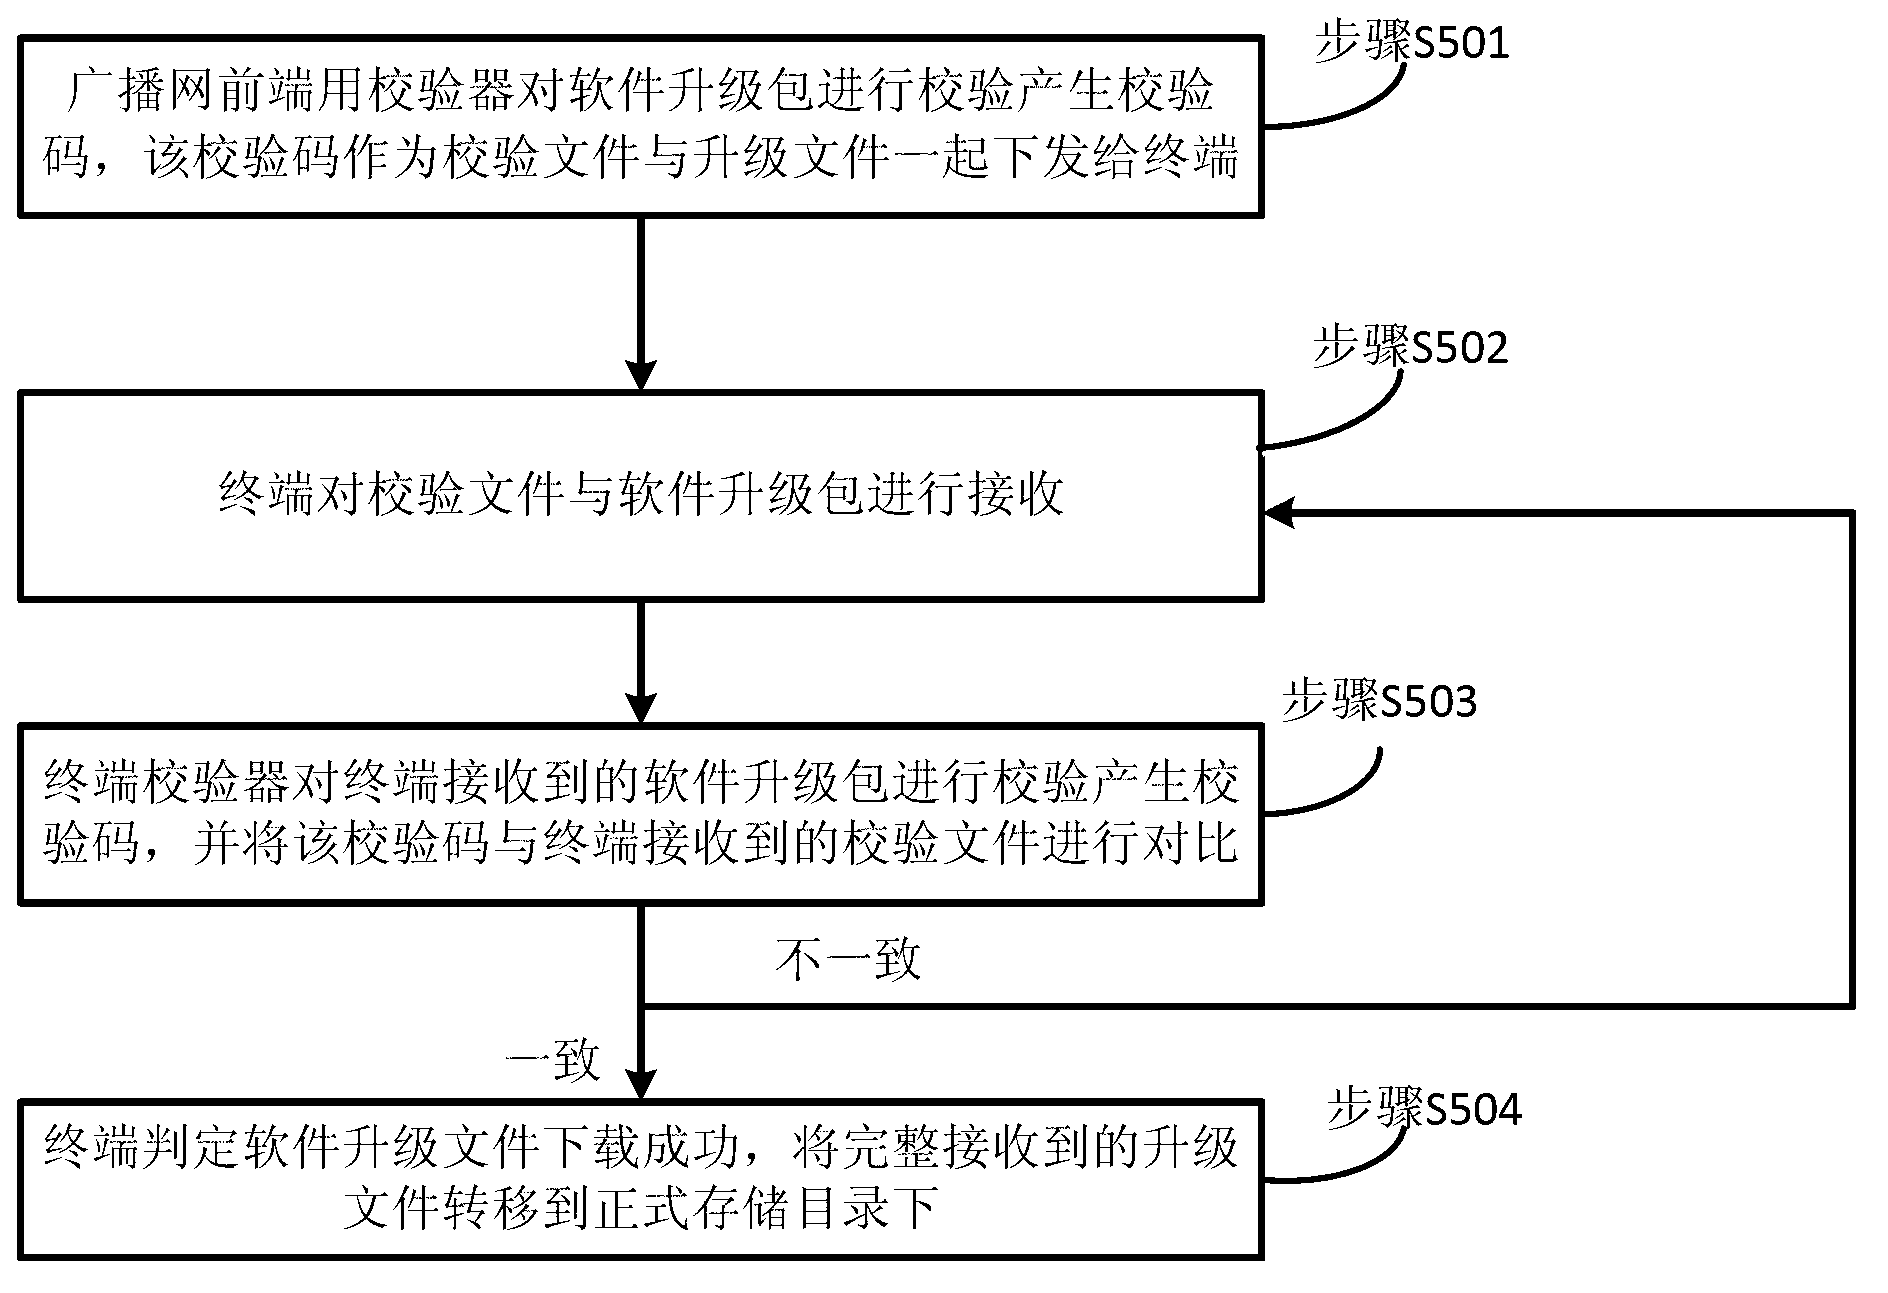 Air upgrading and uploading method of terminal software